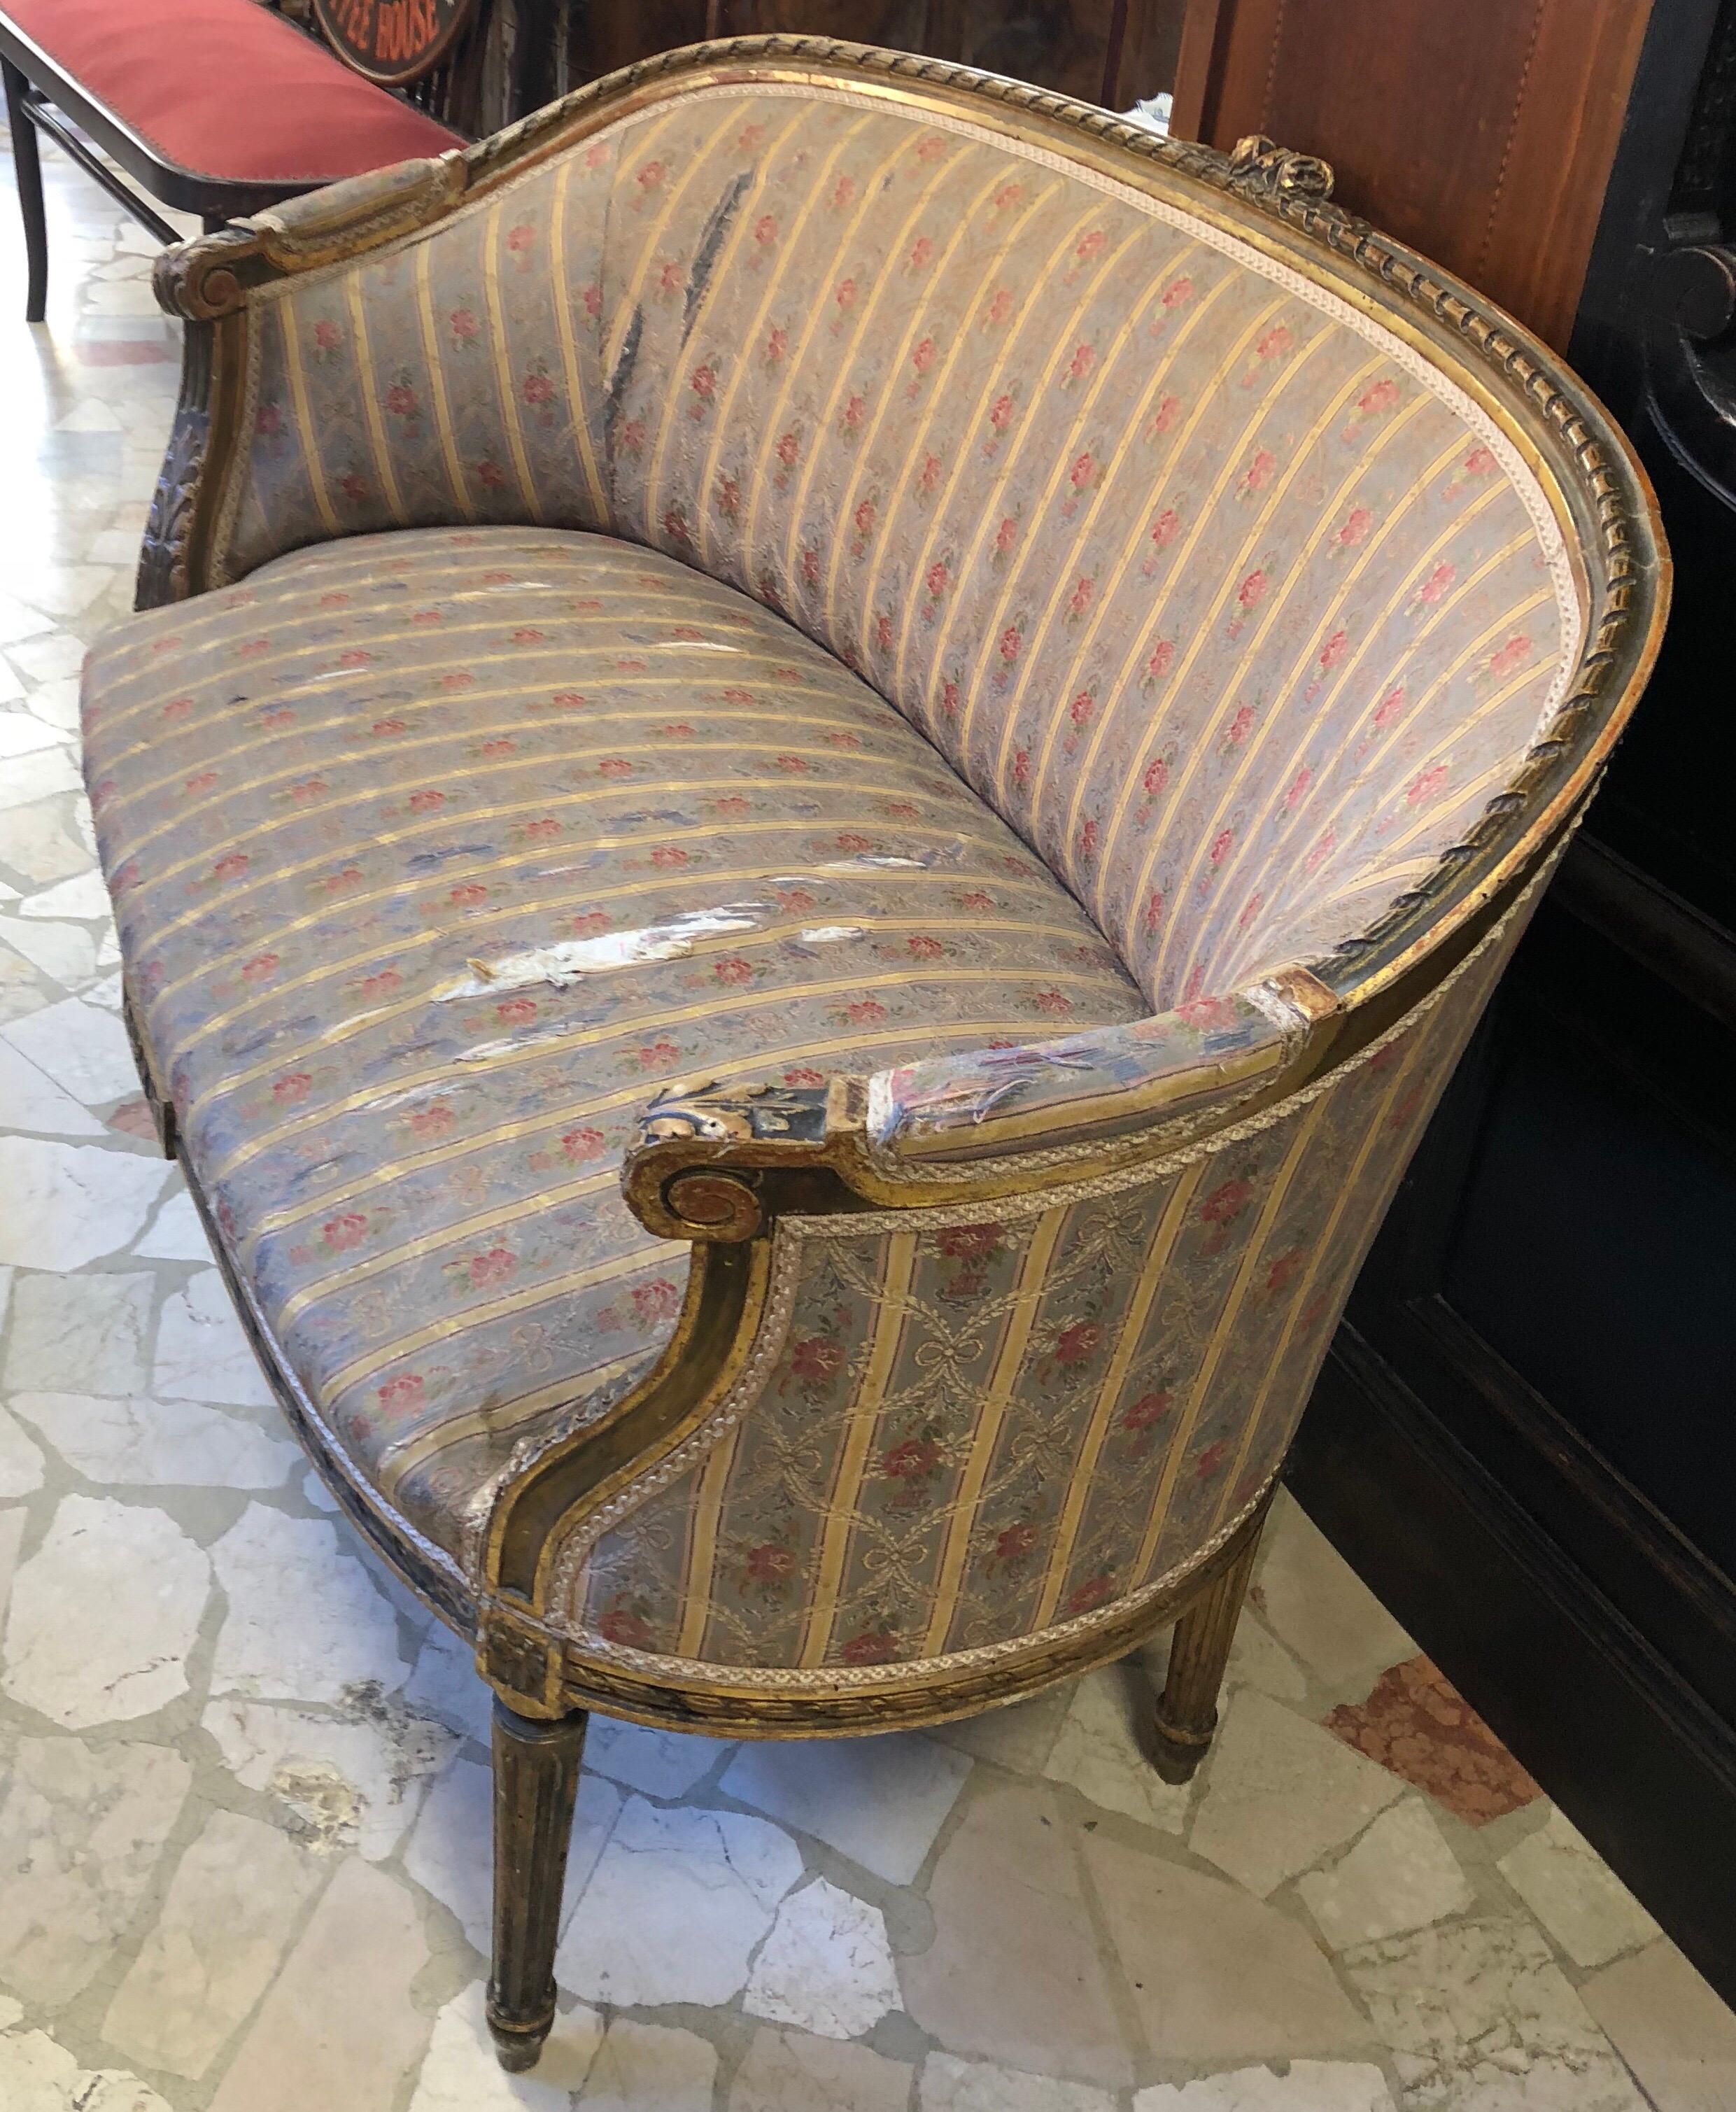 To be reupholstered under customer's wish or sold in this condition.

Summer discounts for shipping!

Contact us for more information, please !   